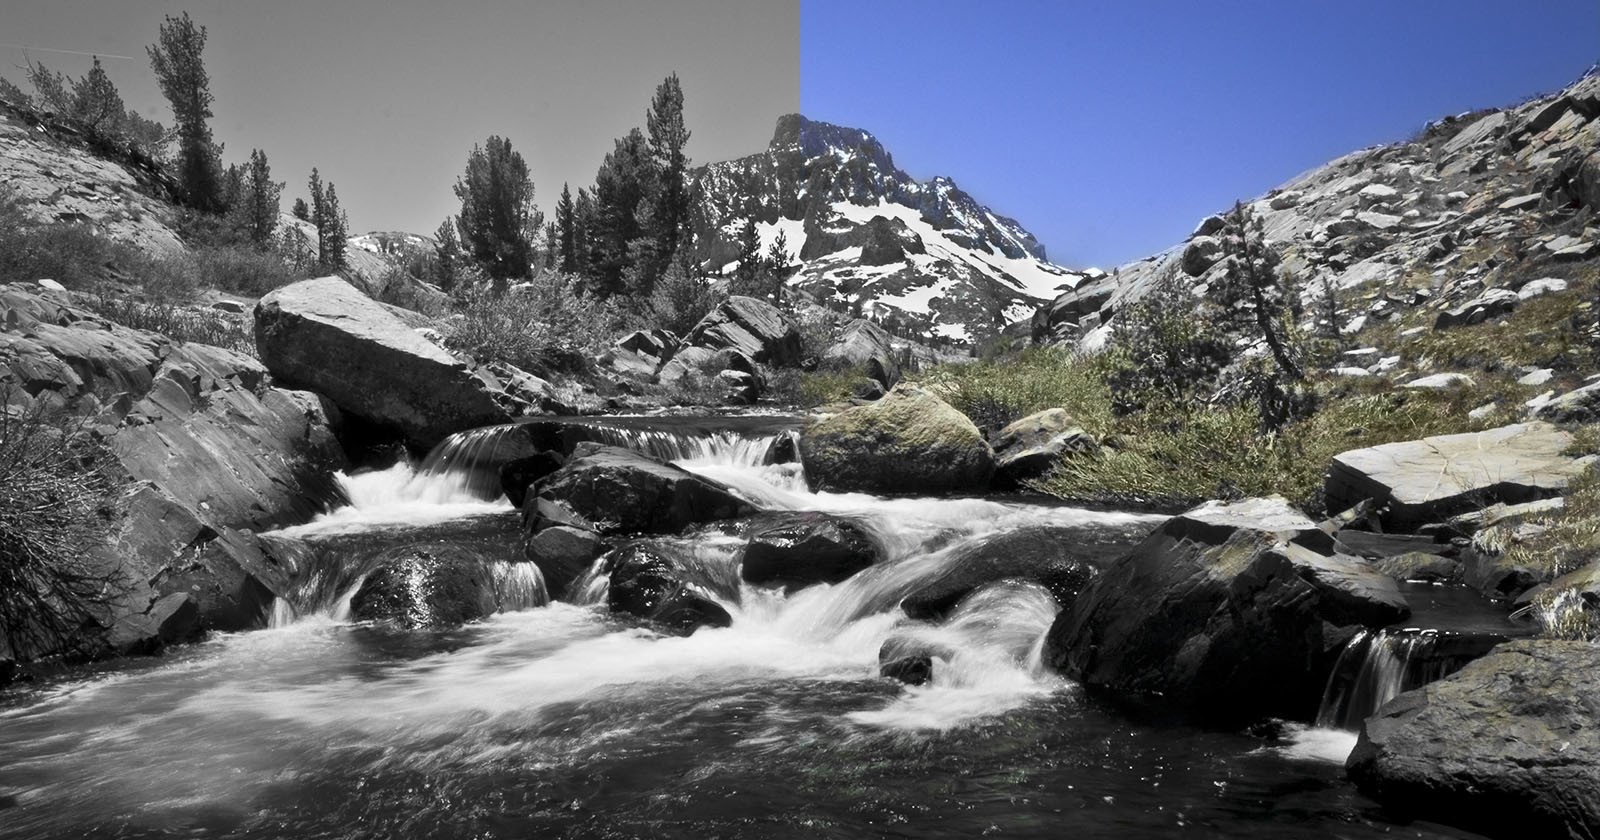 Colorizing B&W Photos Then and Now, From Oils to Neural Filters